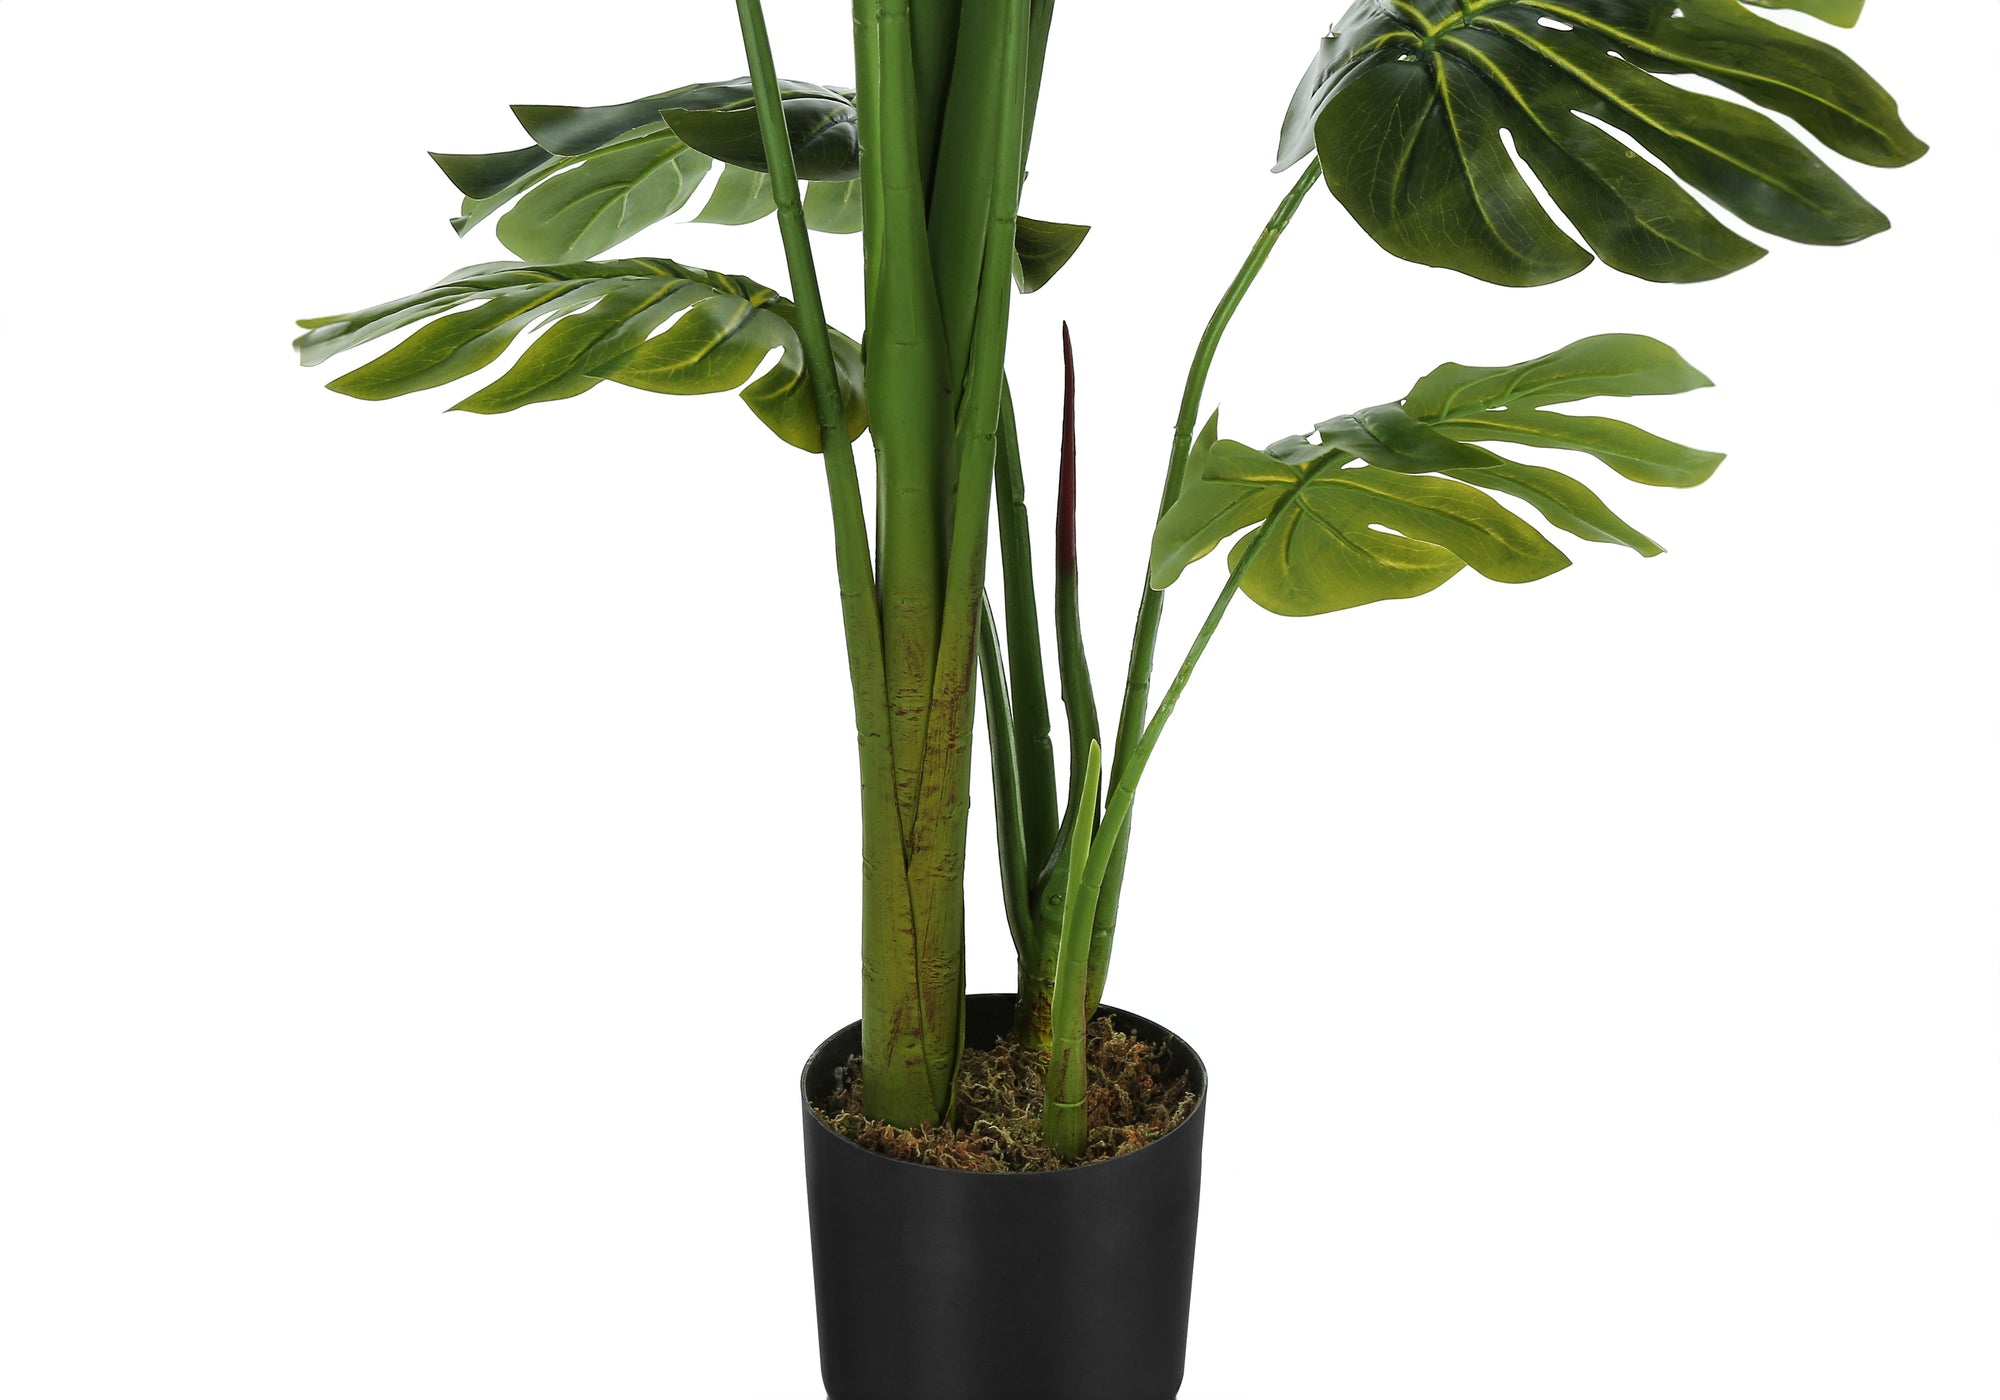 MN-539548    Artificial Plant, 55" Tall, Monstera Tree, Indoor, Faux, Fake, Floor, Greenery, Potted, Real Touch, Decorative, Green Leaves, Black Pot